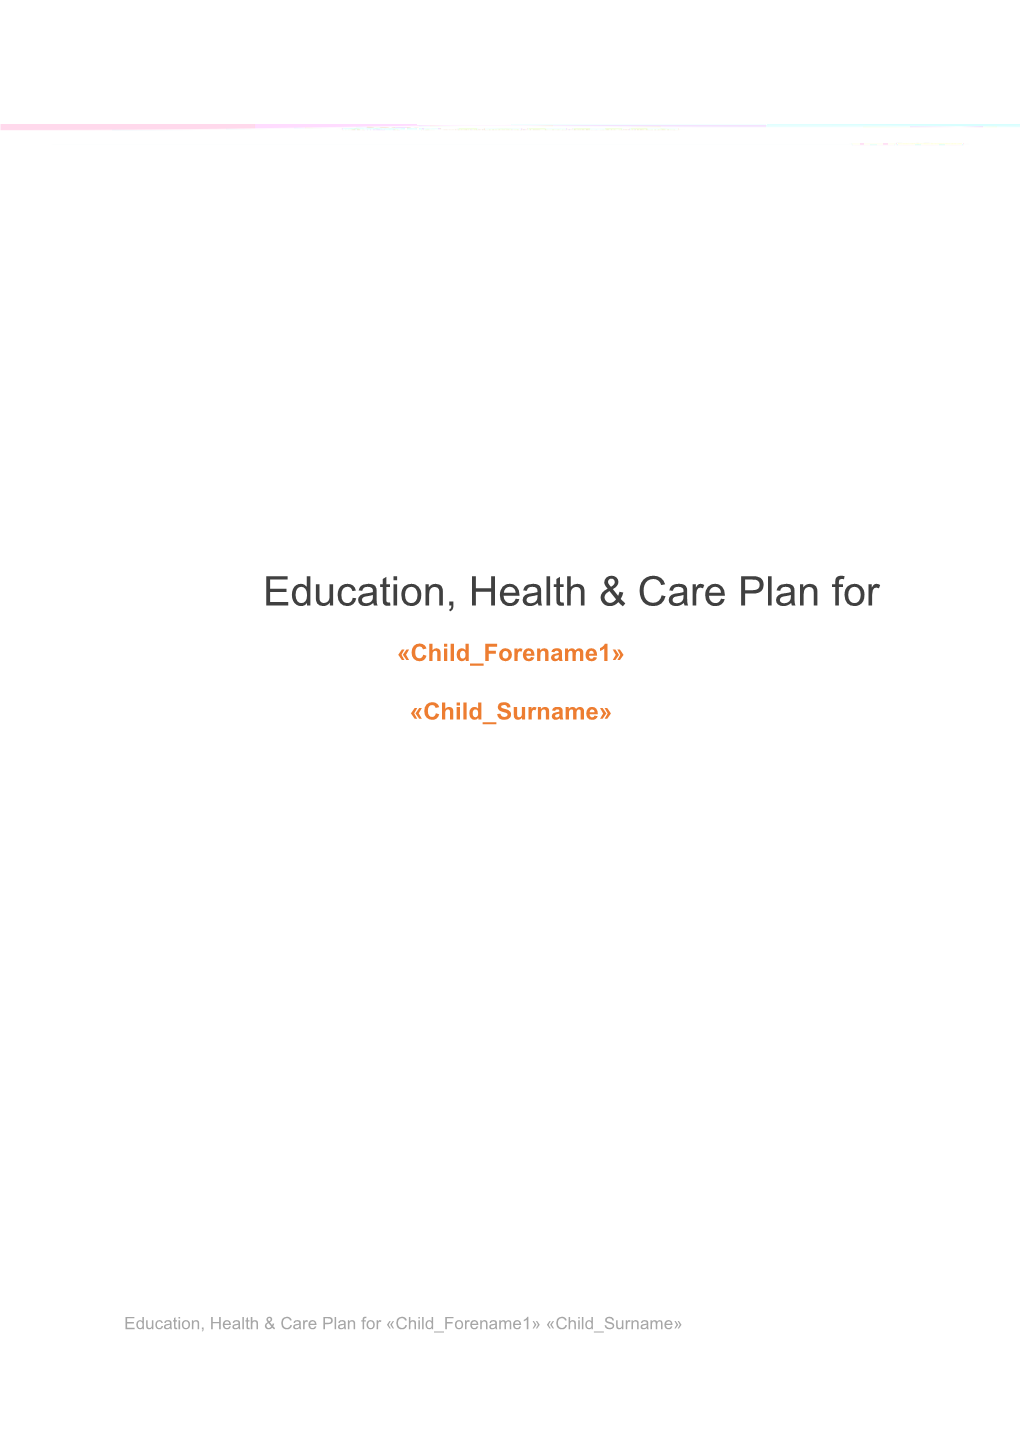 Education, Health & Care Plan For